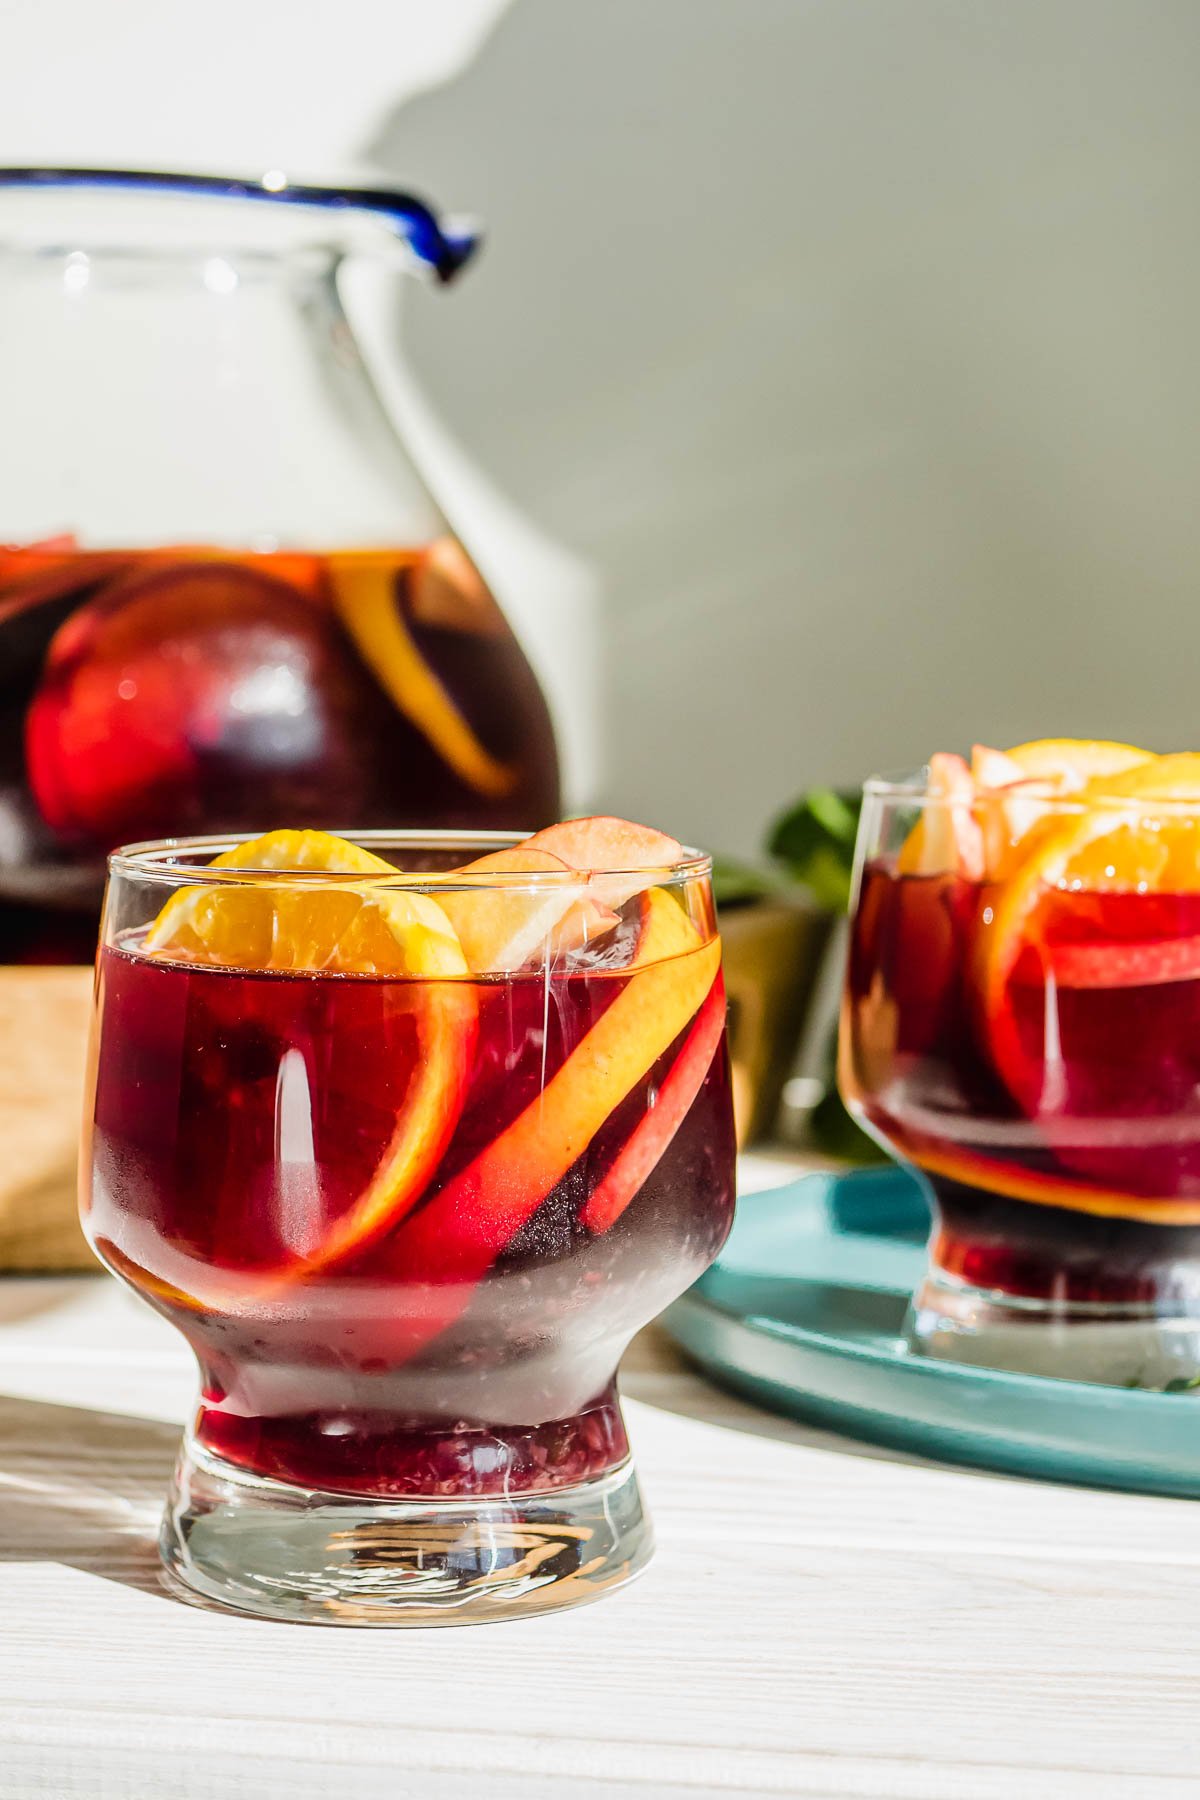 two glasses of red sangria and sliced oranges with a pitcher of sangria in the background.